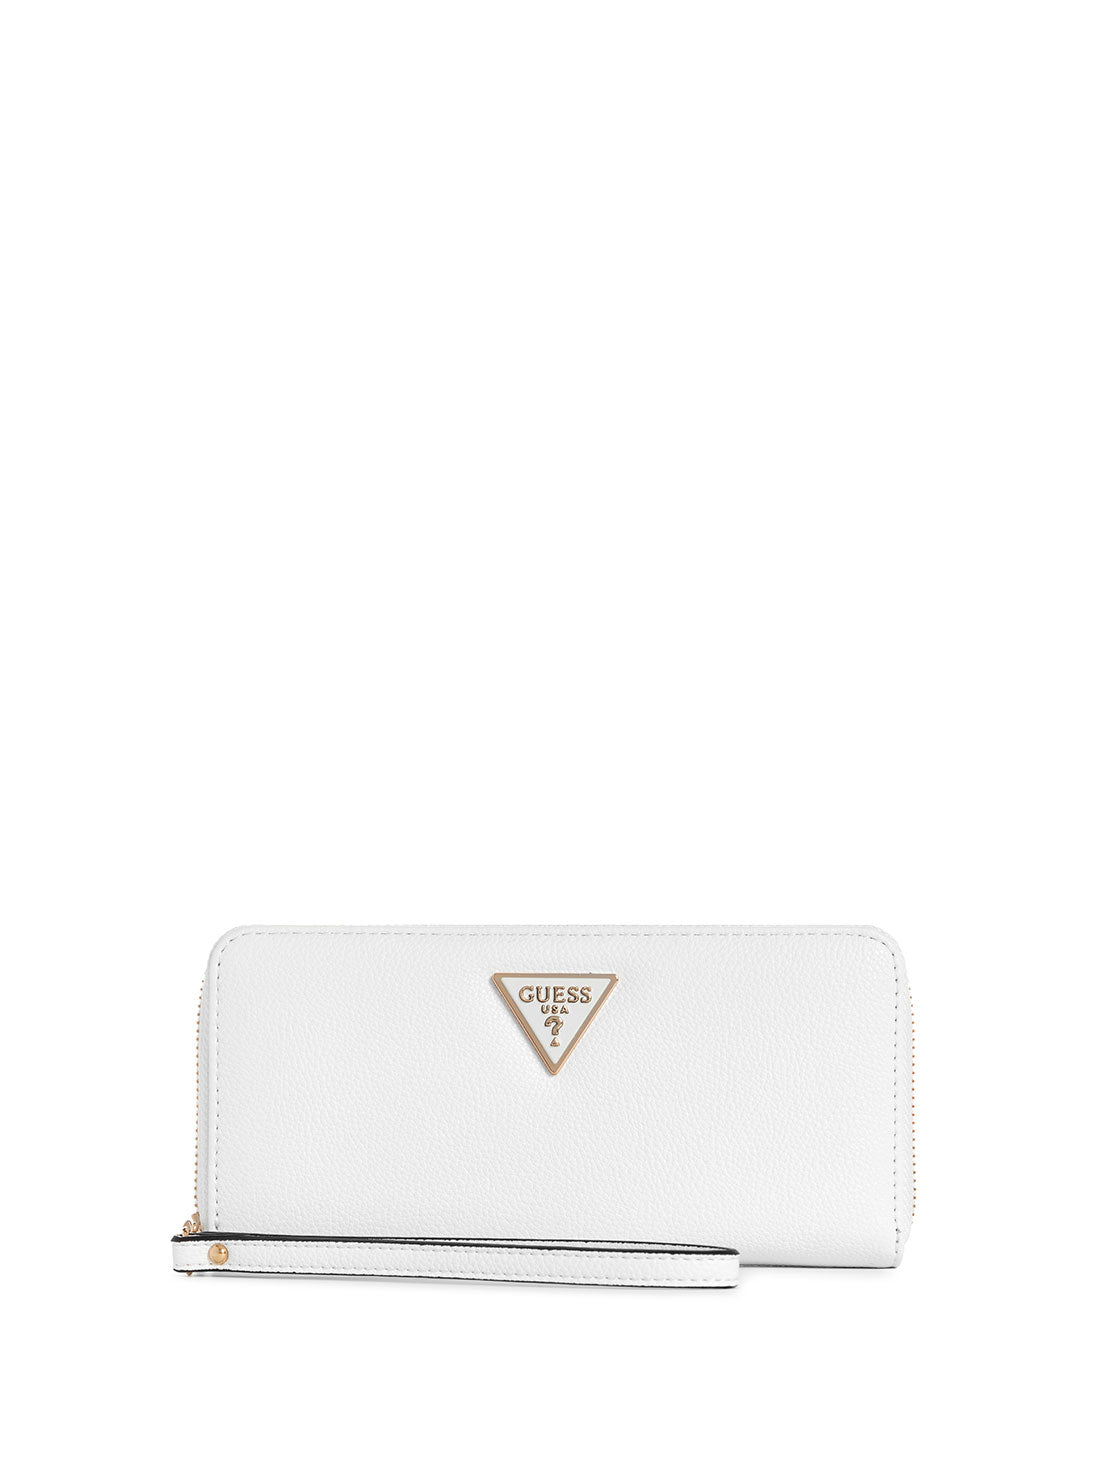 GUESS White Meridian Medium Wallet front view